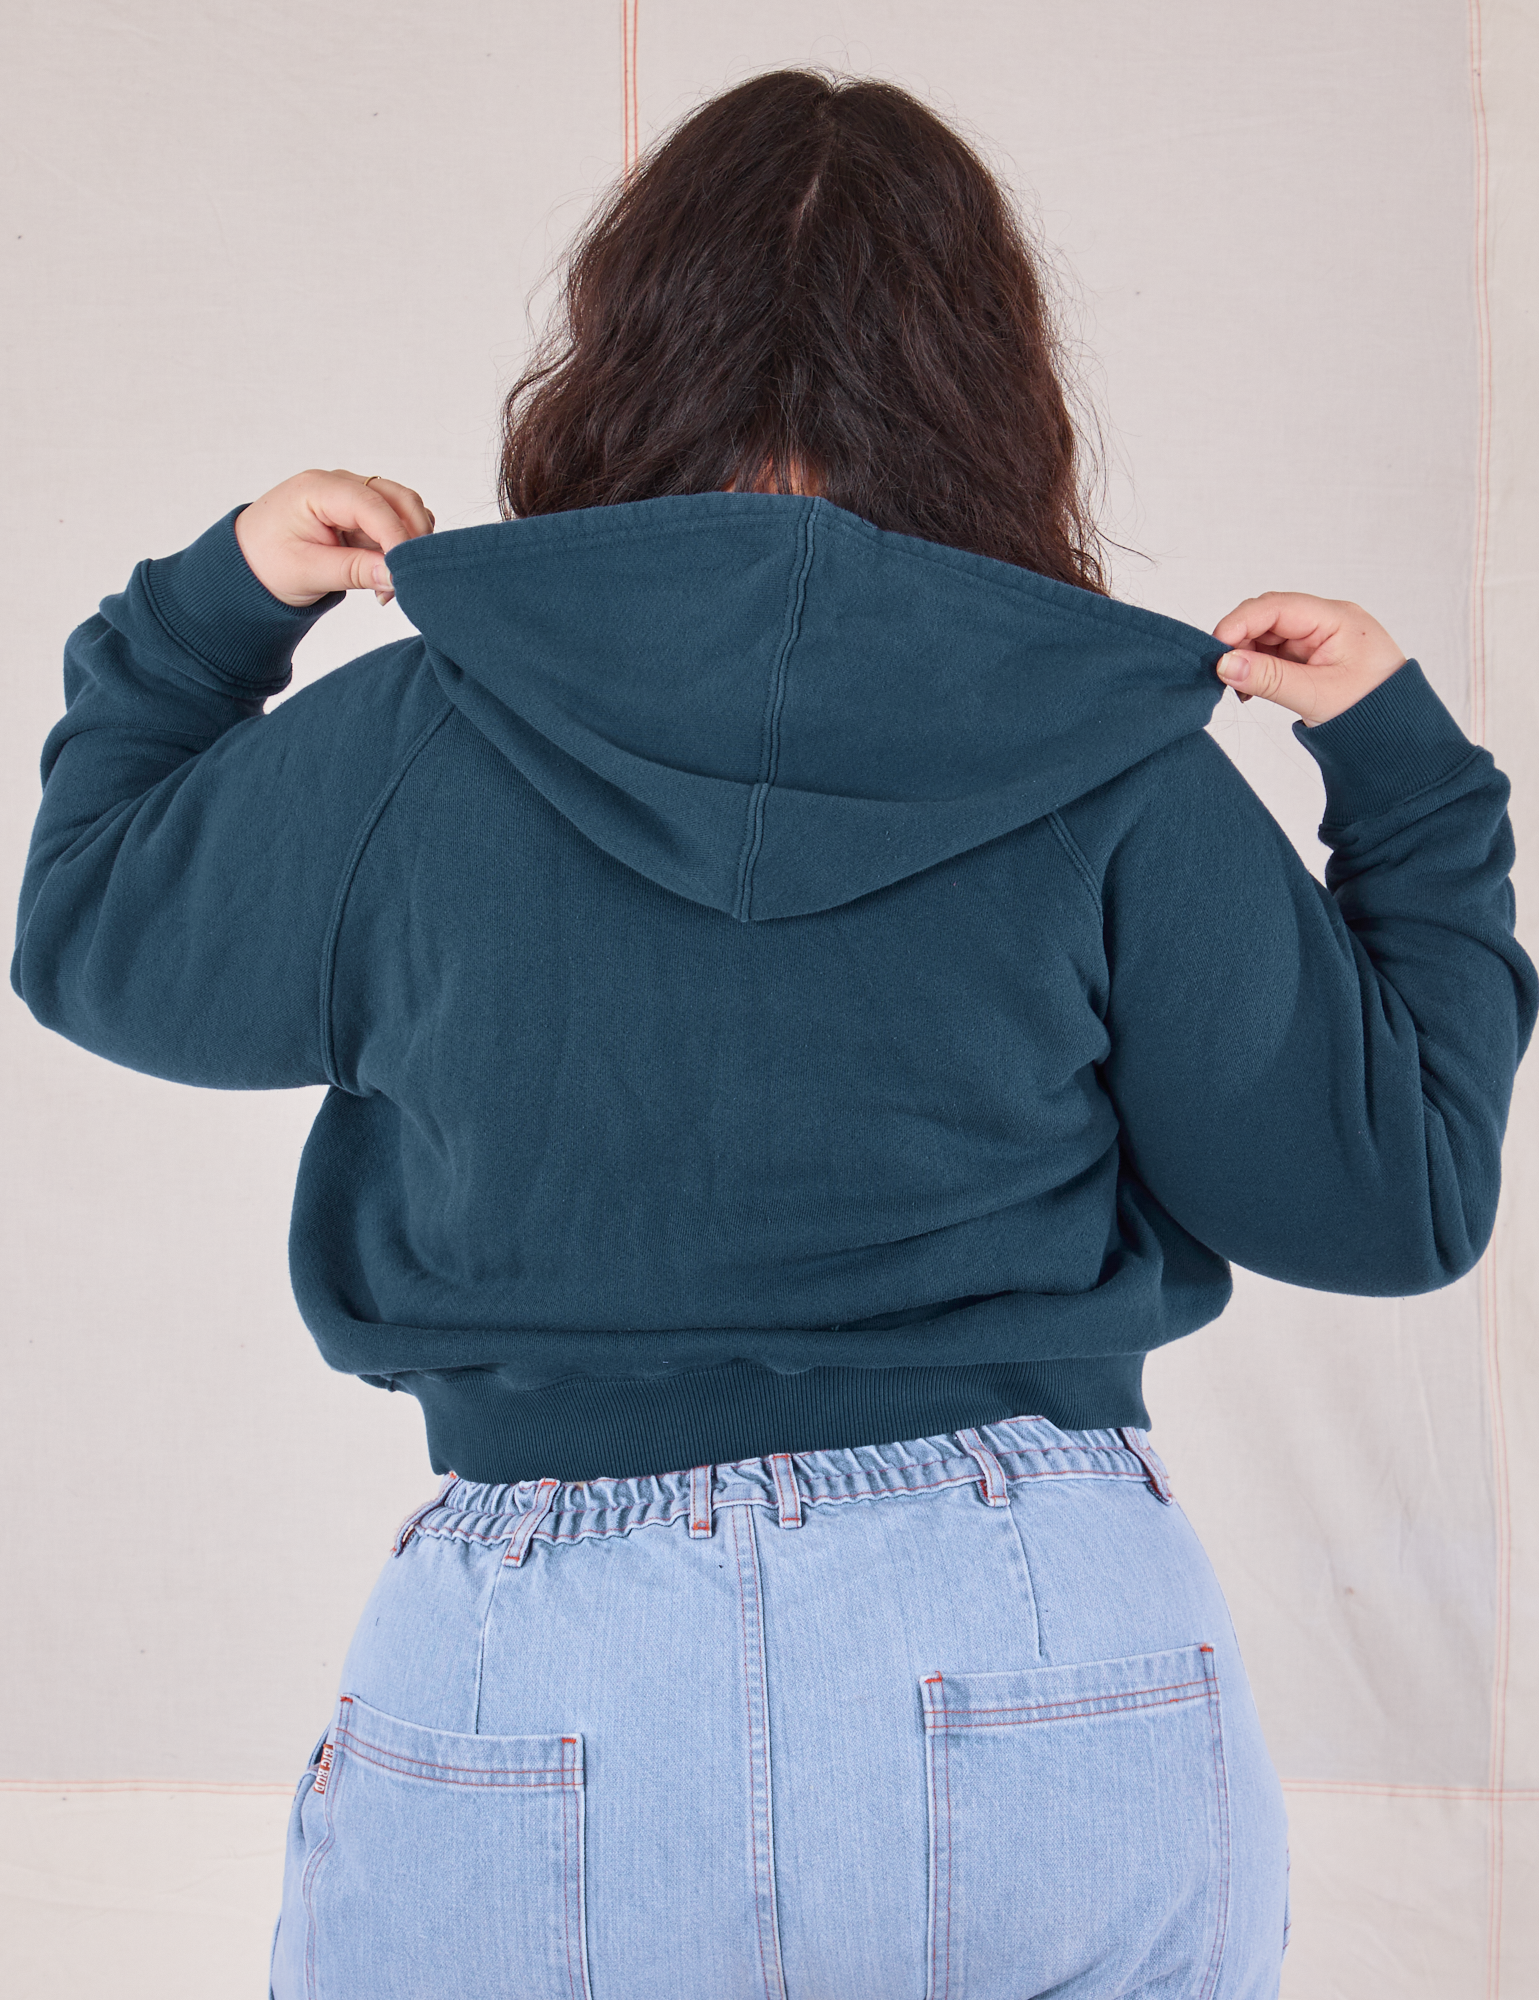 Cropped Zip Hoodie in Lagoon back view on Ashley